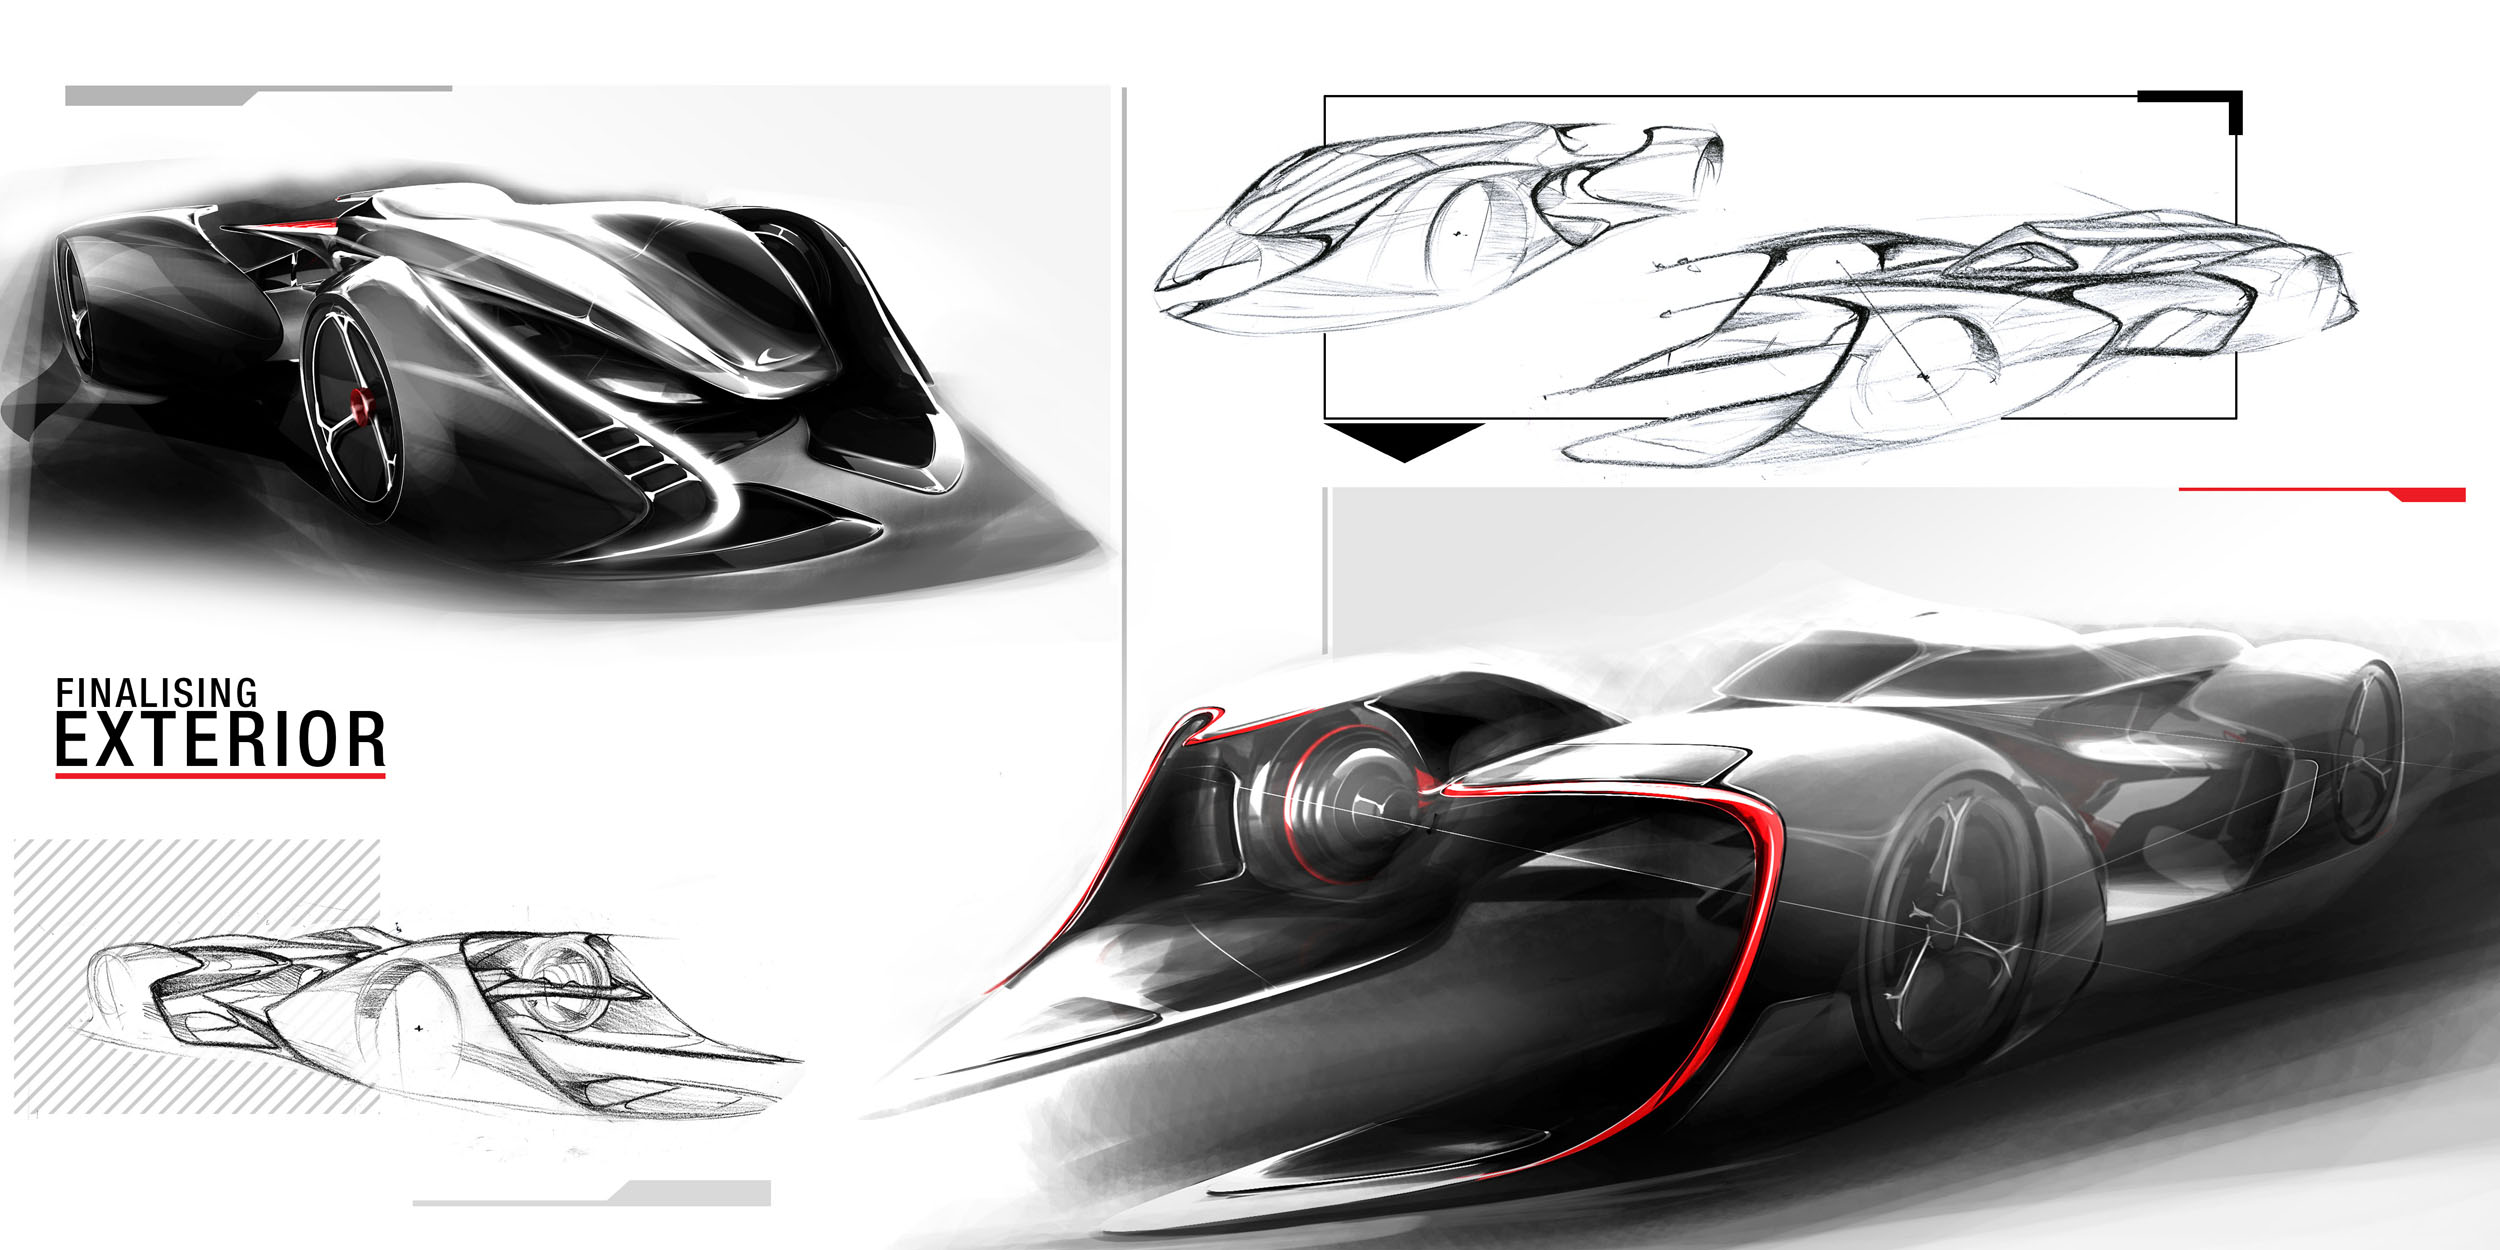 Futuristic McLaren Motorsports Spirit Concept Car for The Year of 2040 and Beyond - Tuvie2500 x 1250